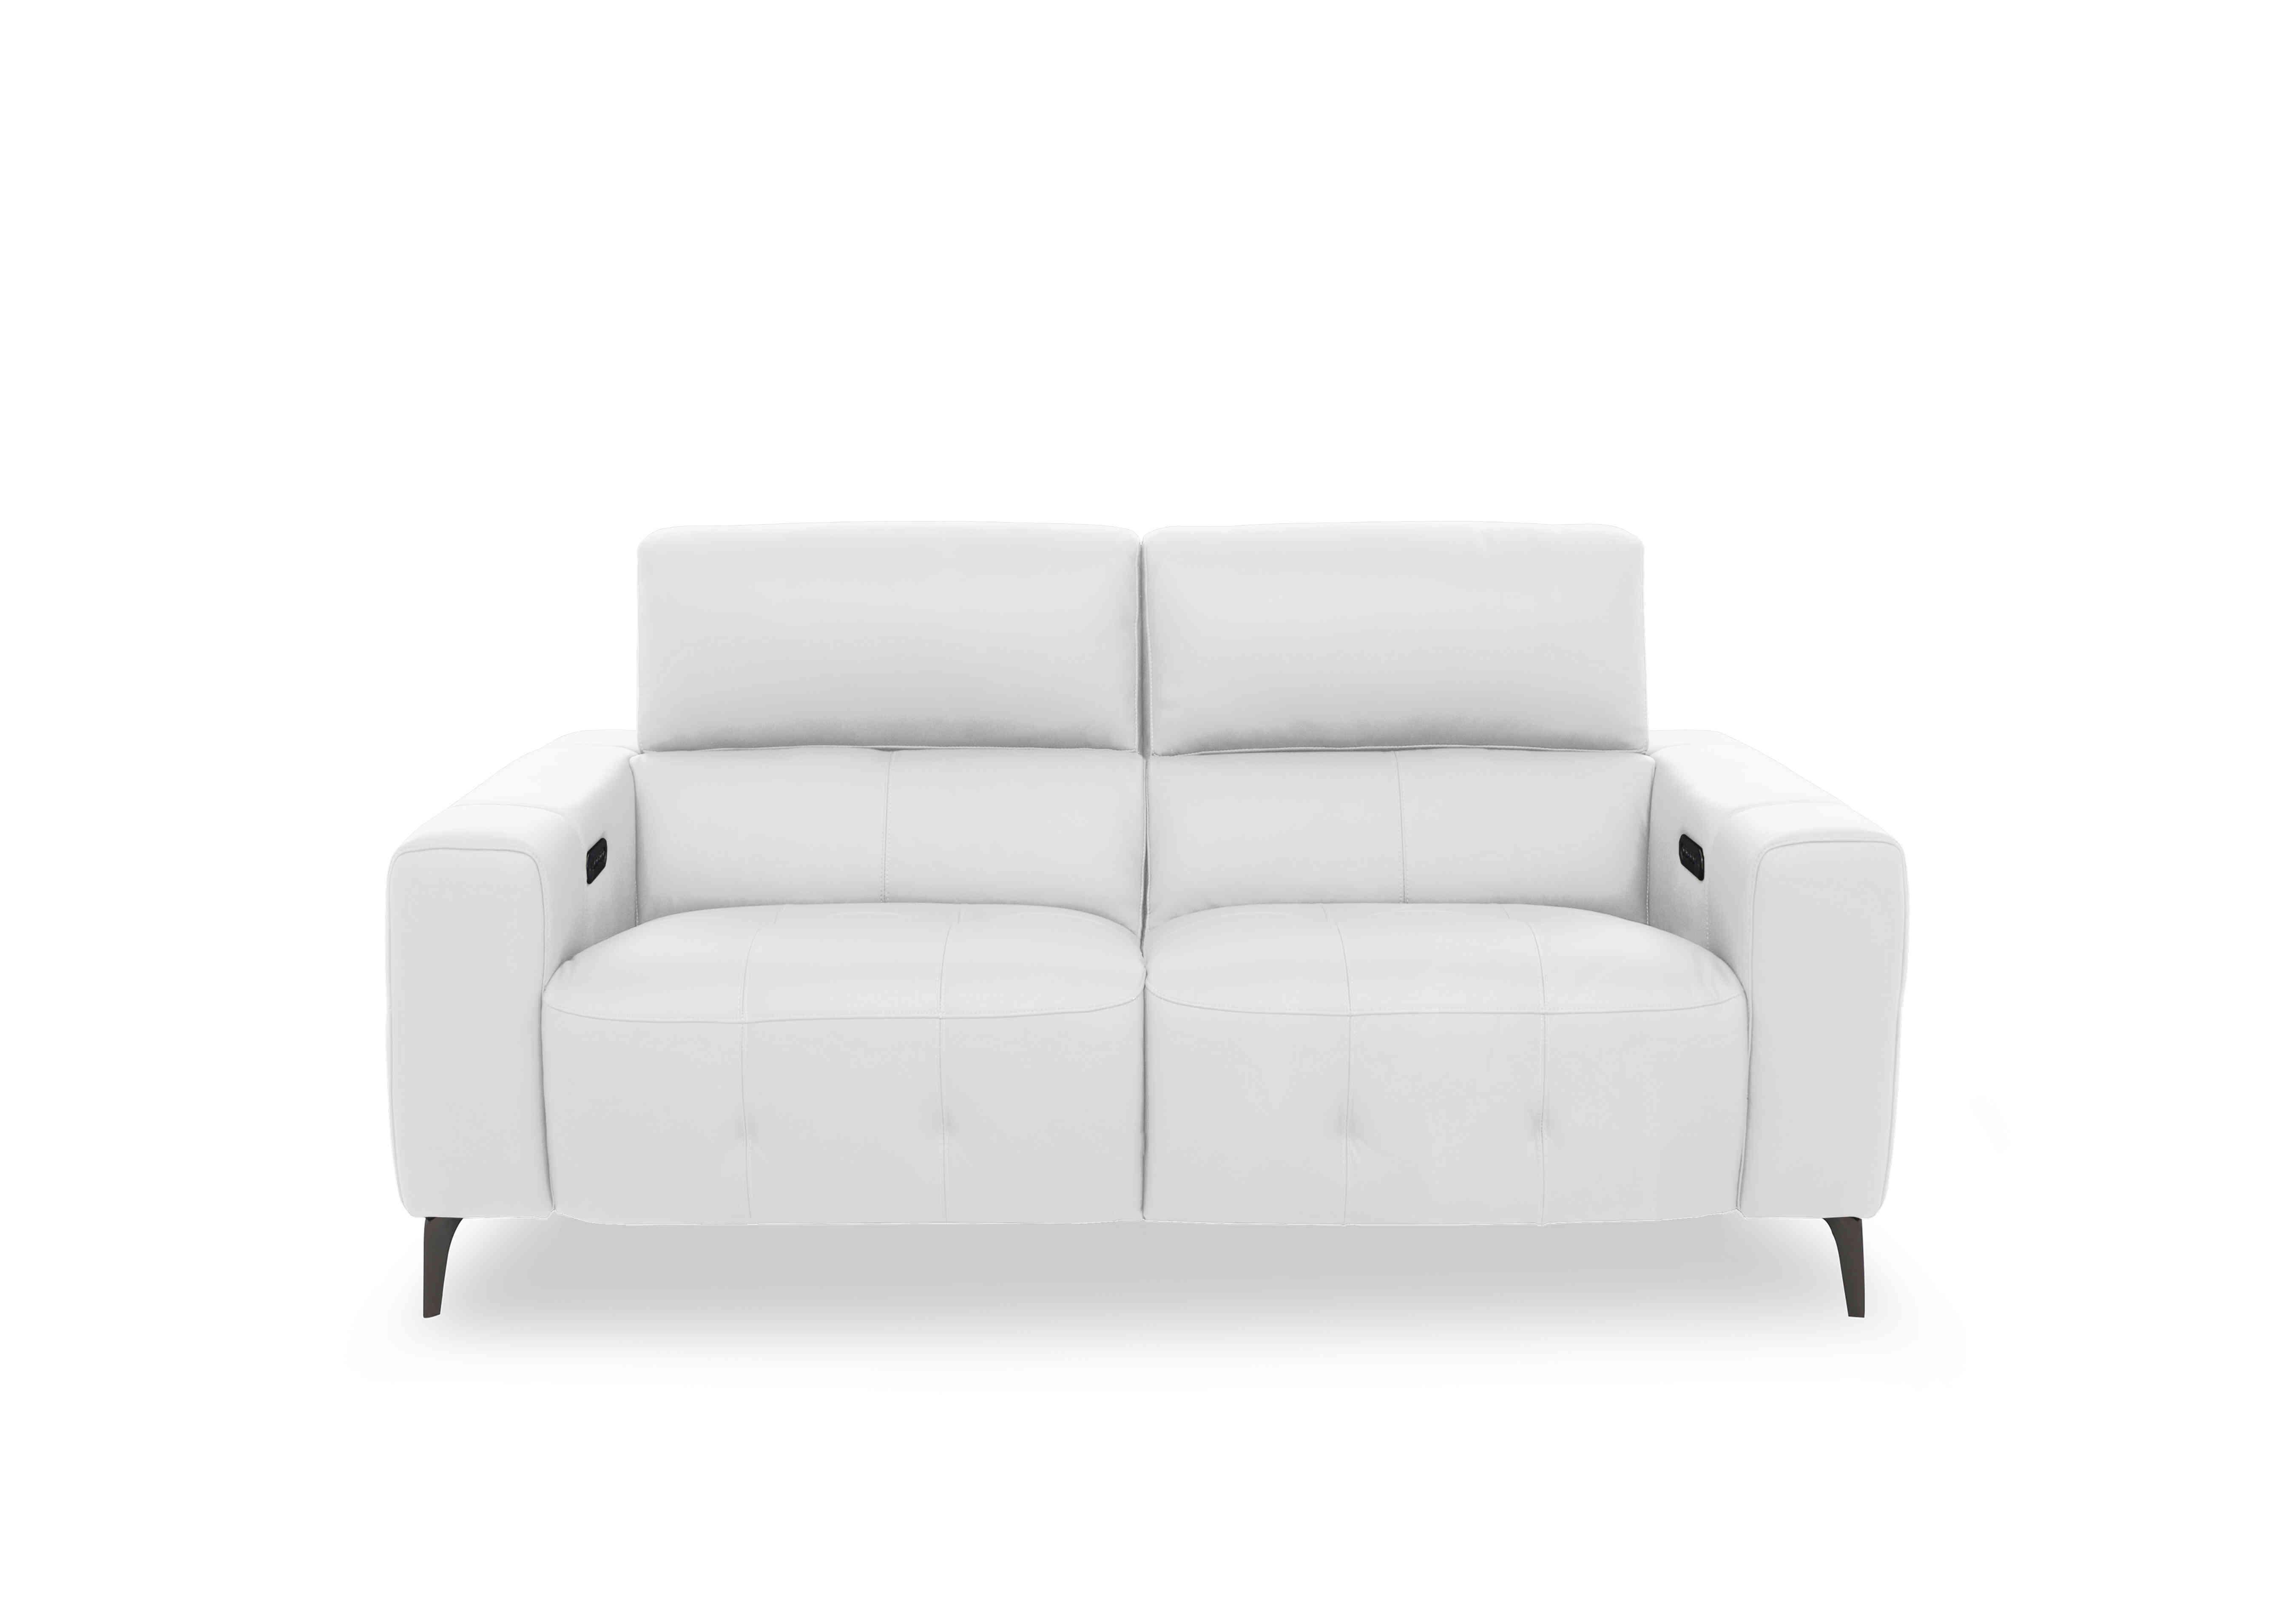 New York 2 Seater Leather Sofa in Bv-744d Star White on Furniture Village